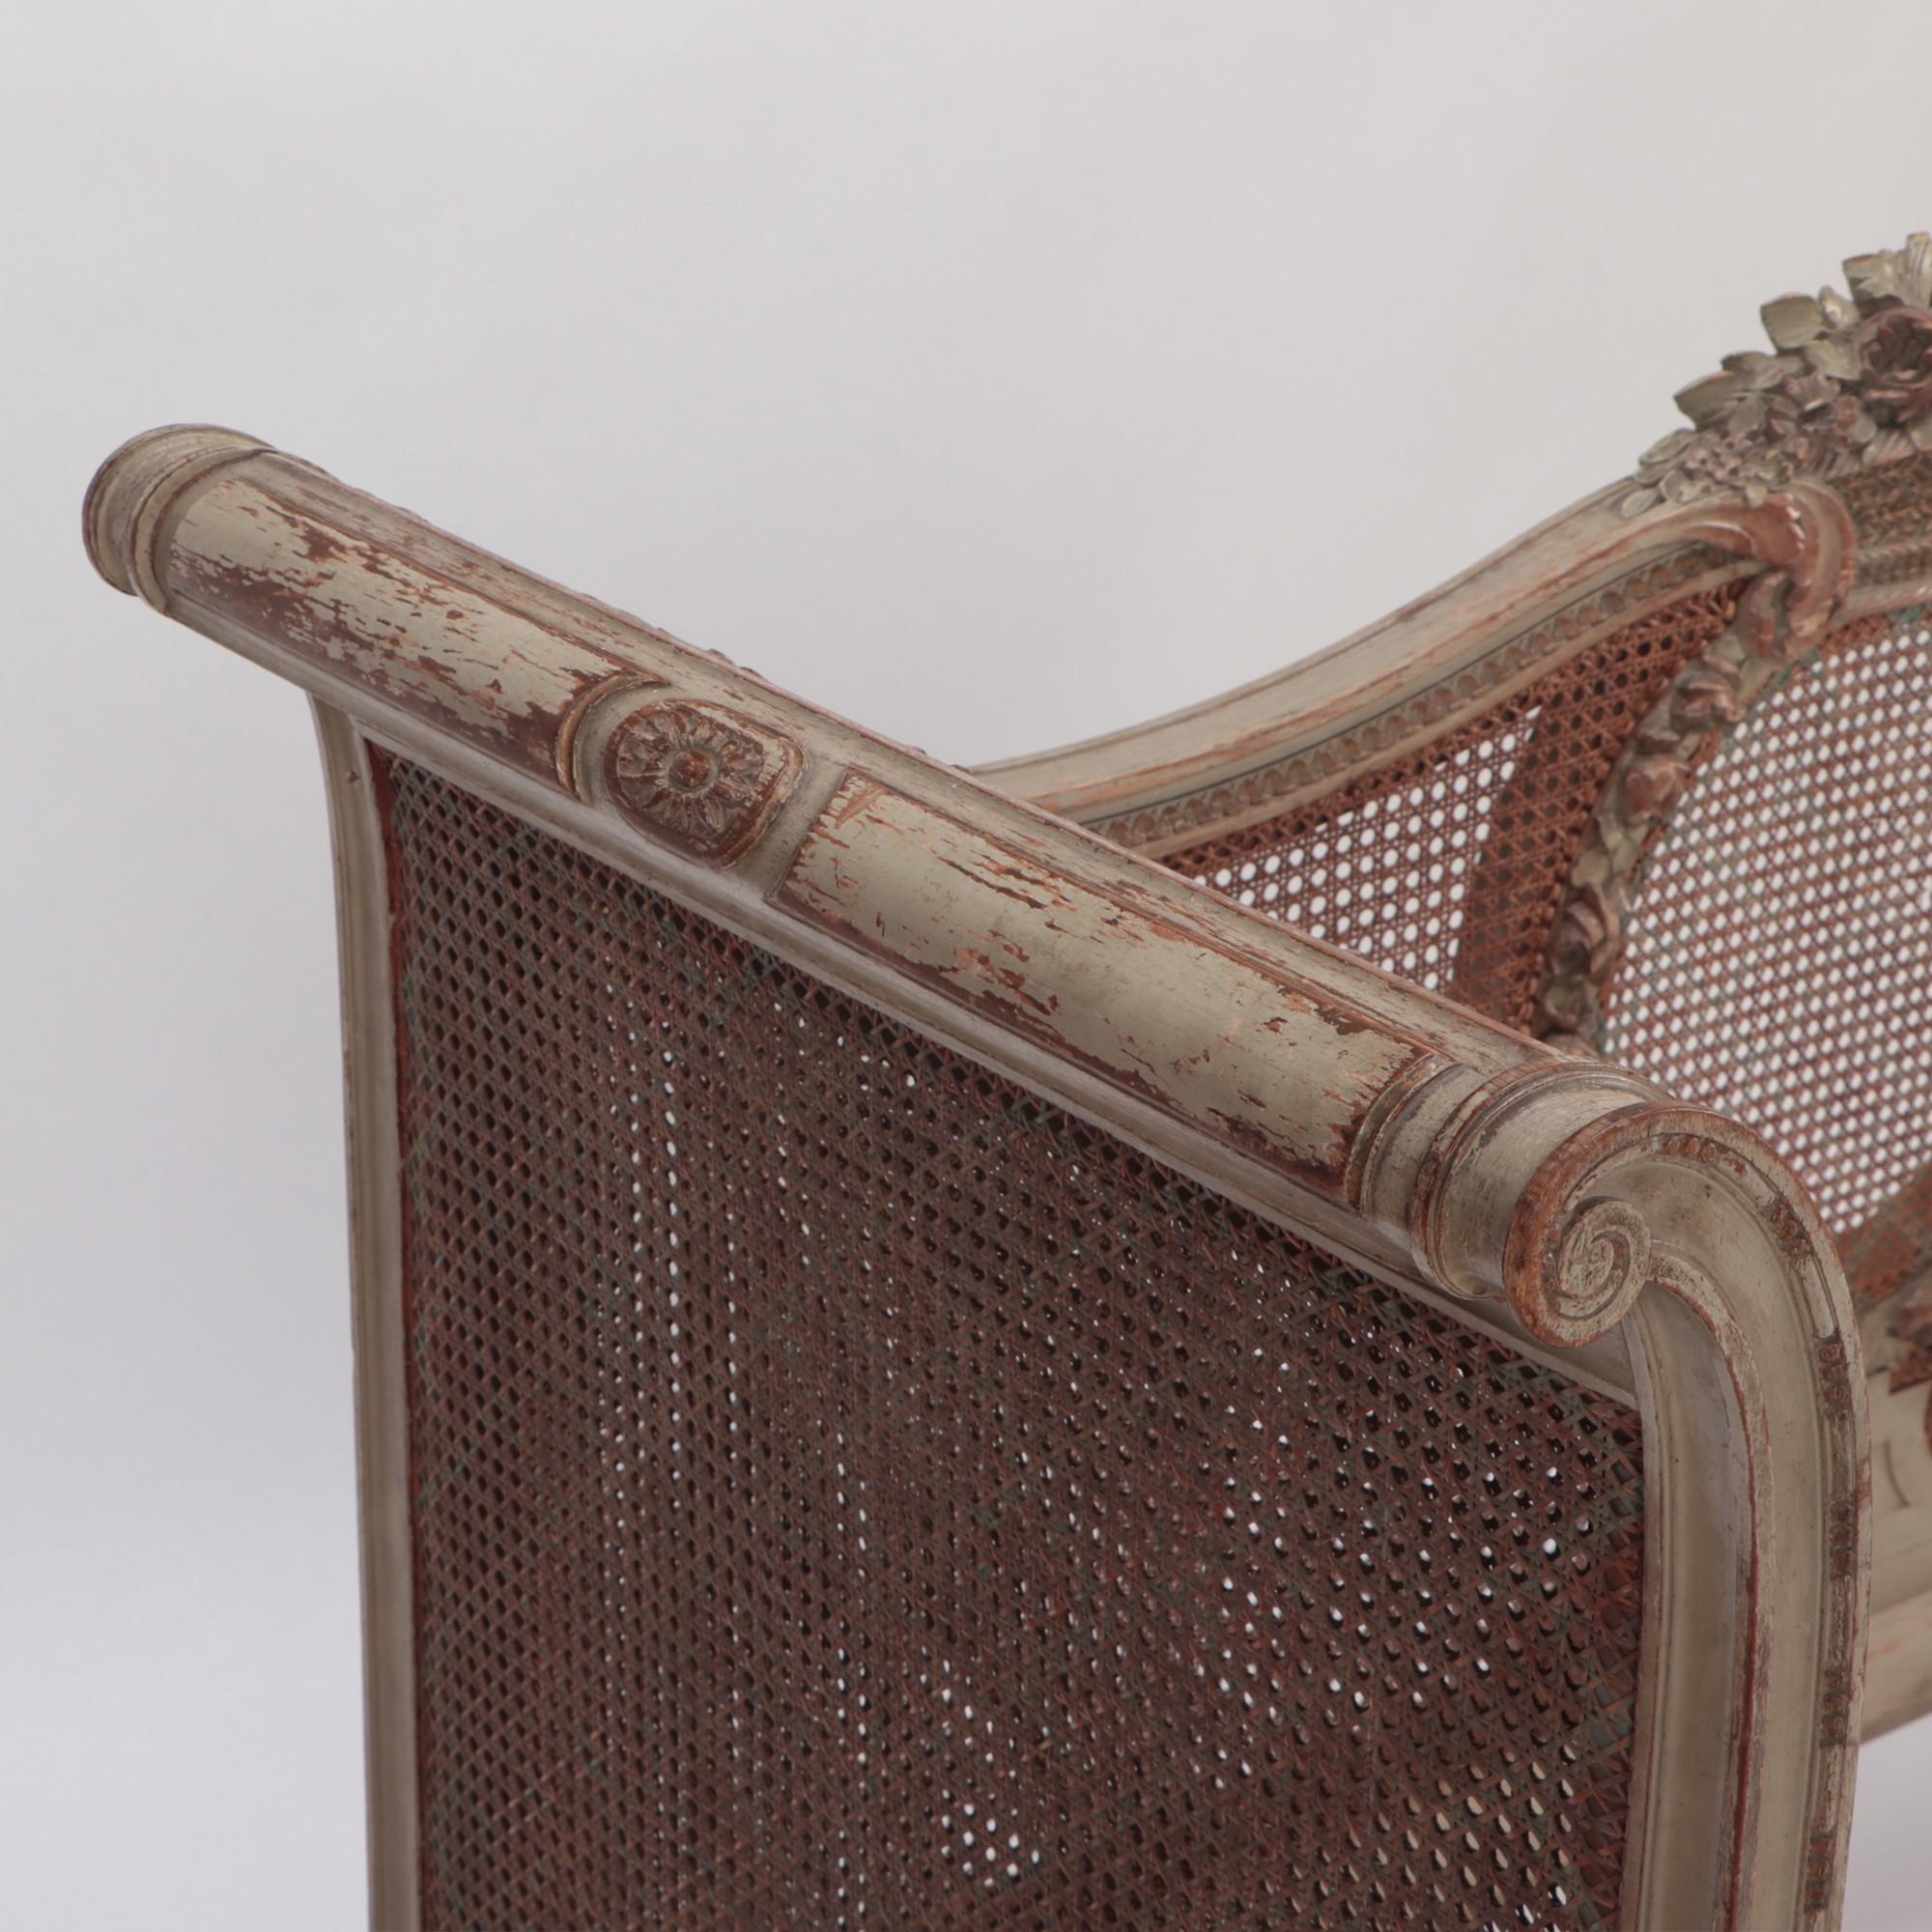 European Late 19th Century French Directoire Painted Cane Daybed/Settee, C 1880 For Sale